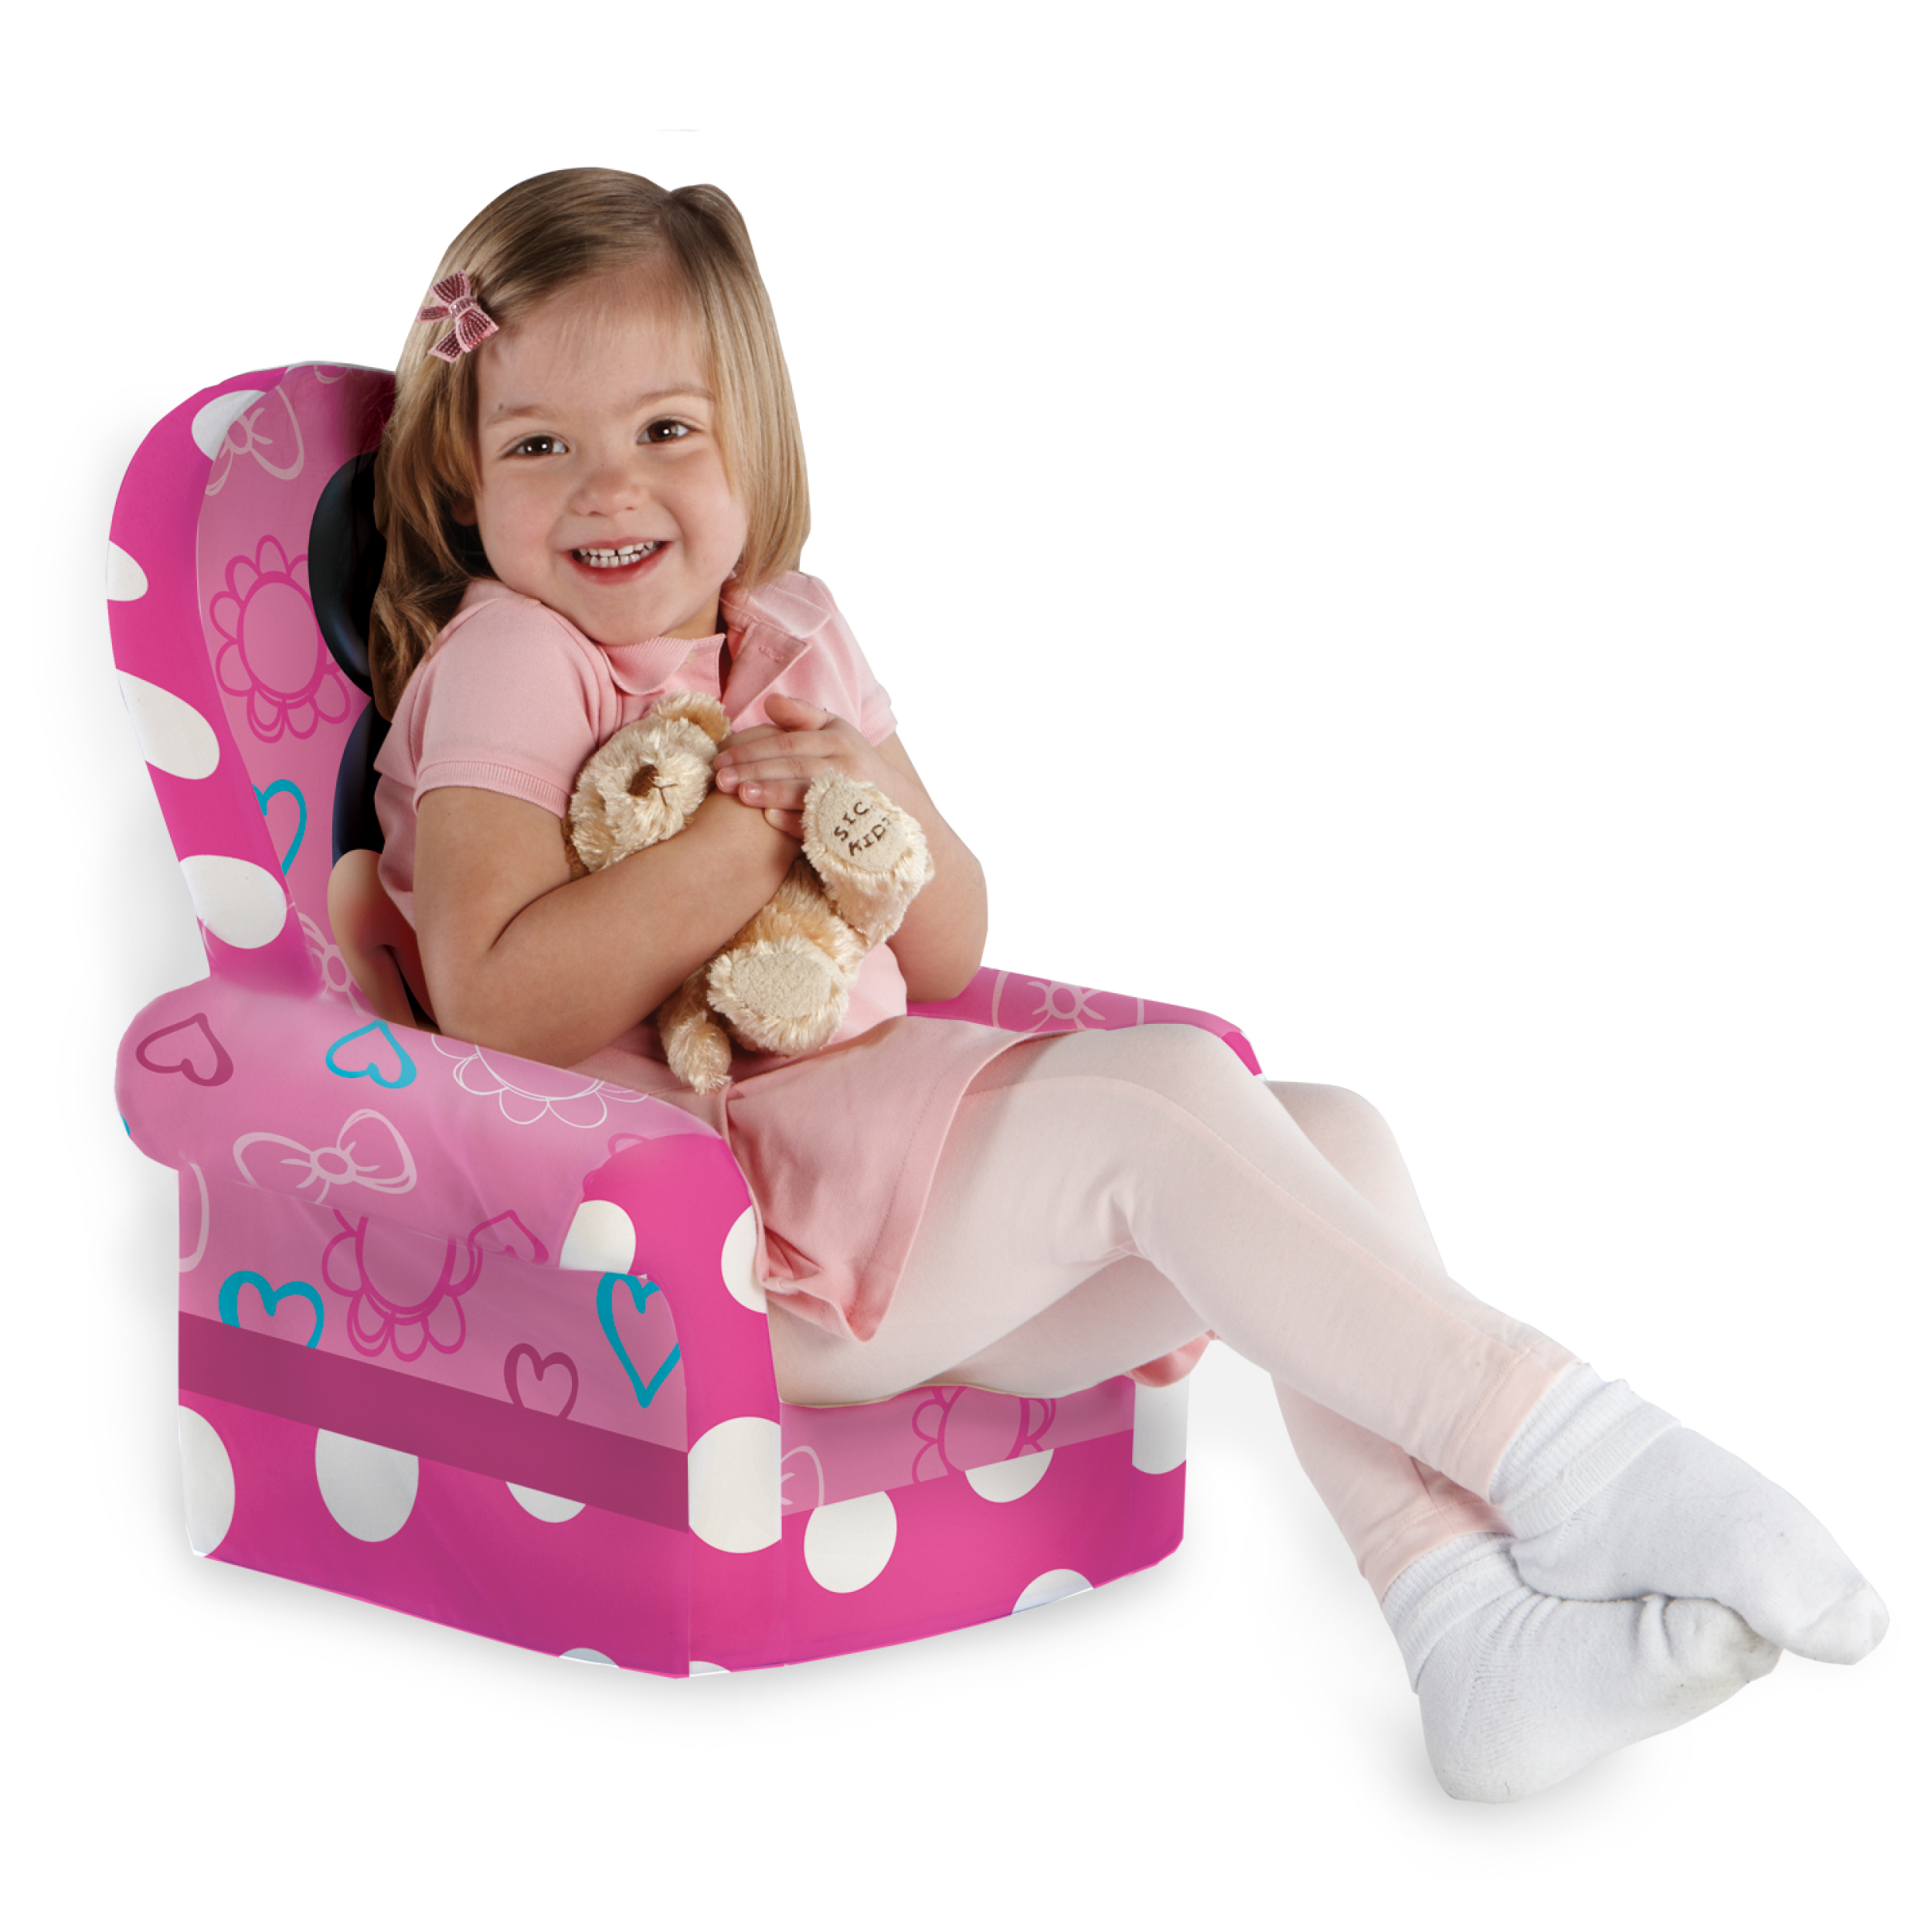 Marshmallow Furniture, Children's Foam High Back Chair, Disney's Minnie Mouse, by Spin Master - image 4 of 4